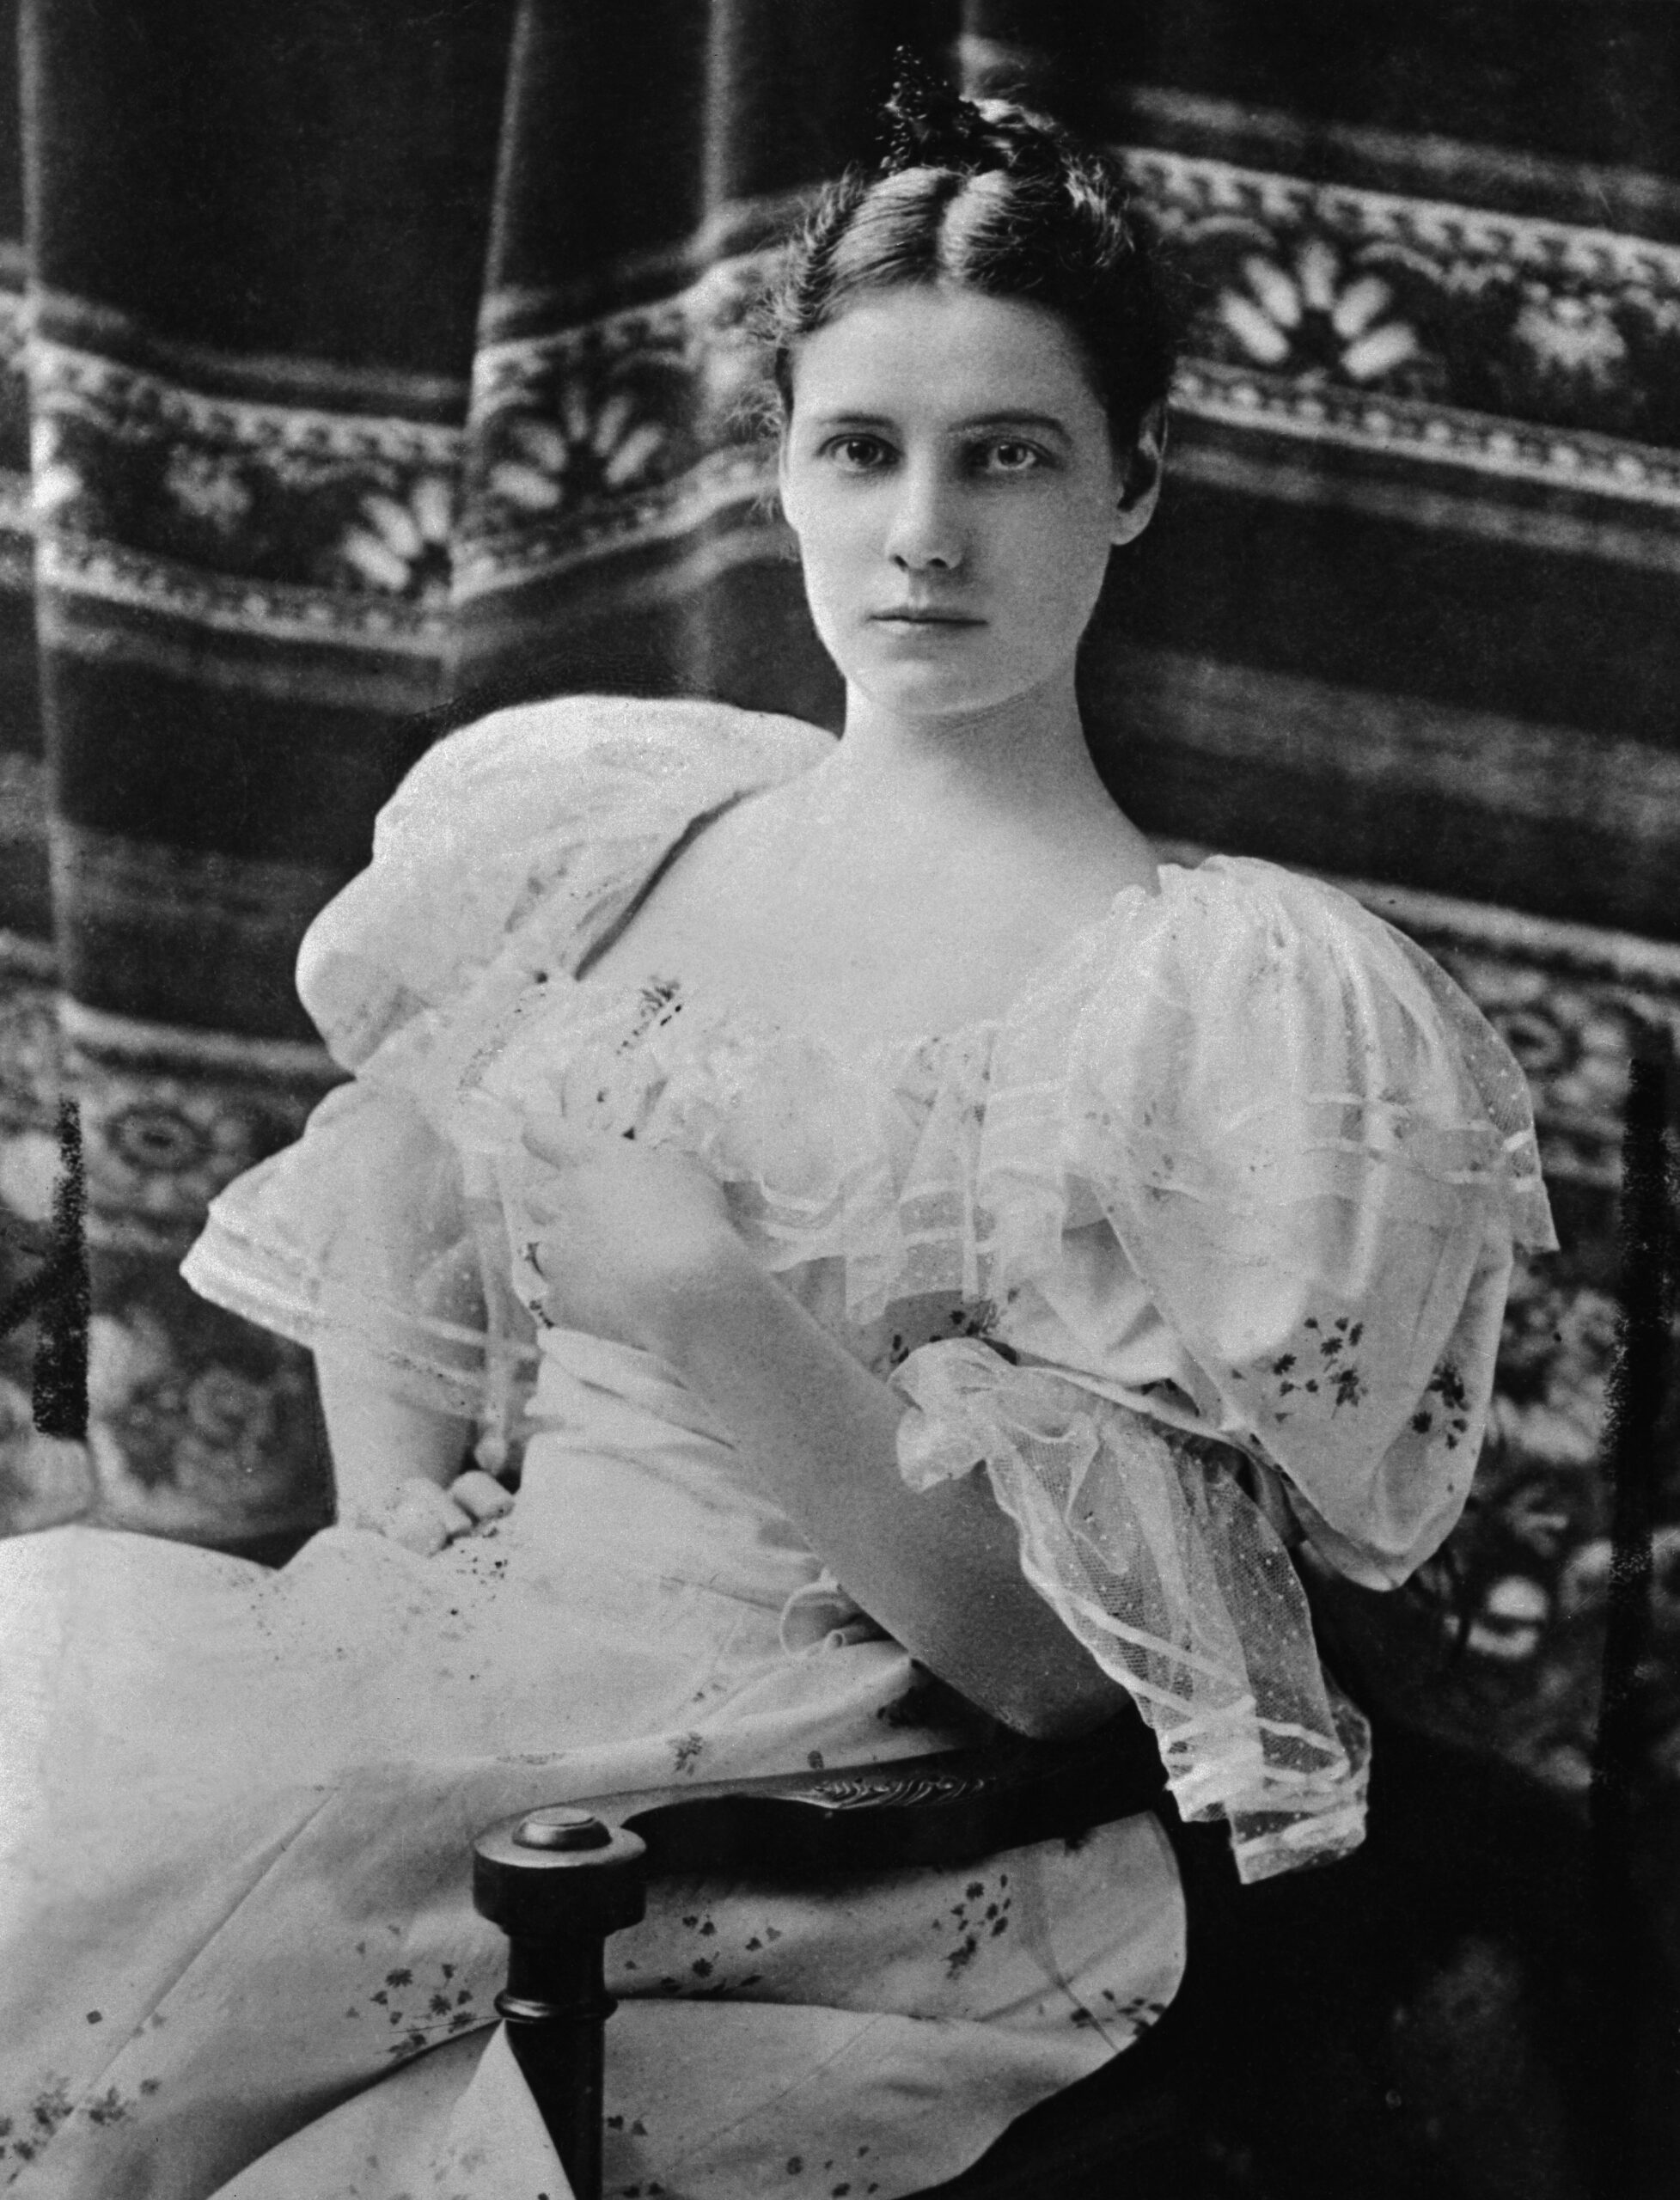 Seated young white woman in a white gown with puffy sleeves